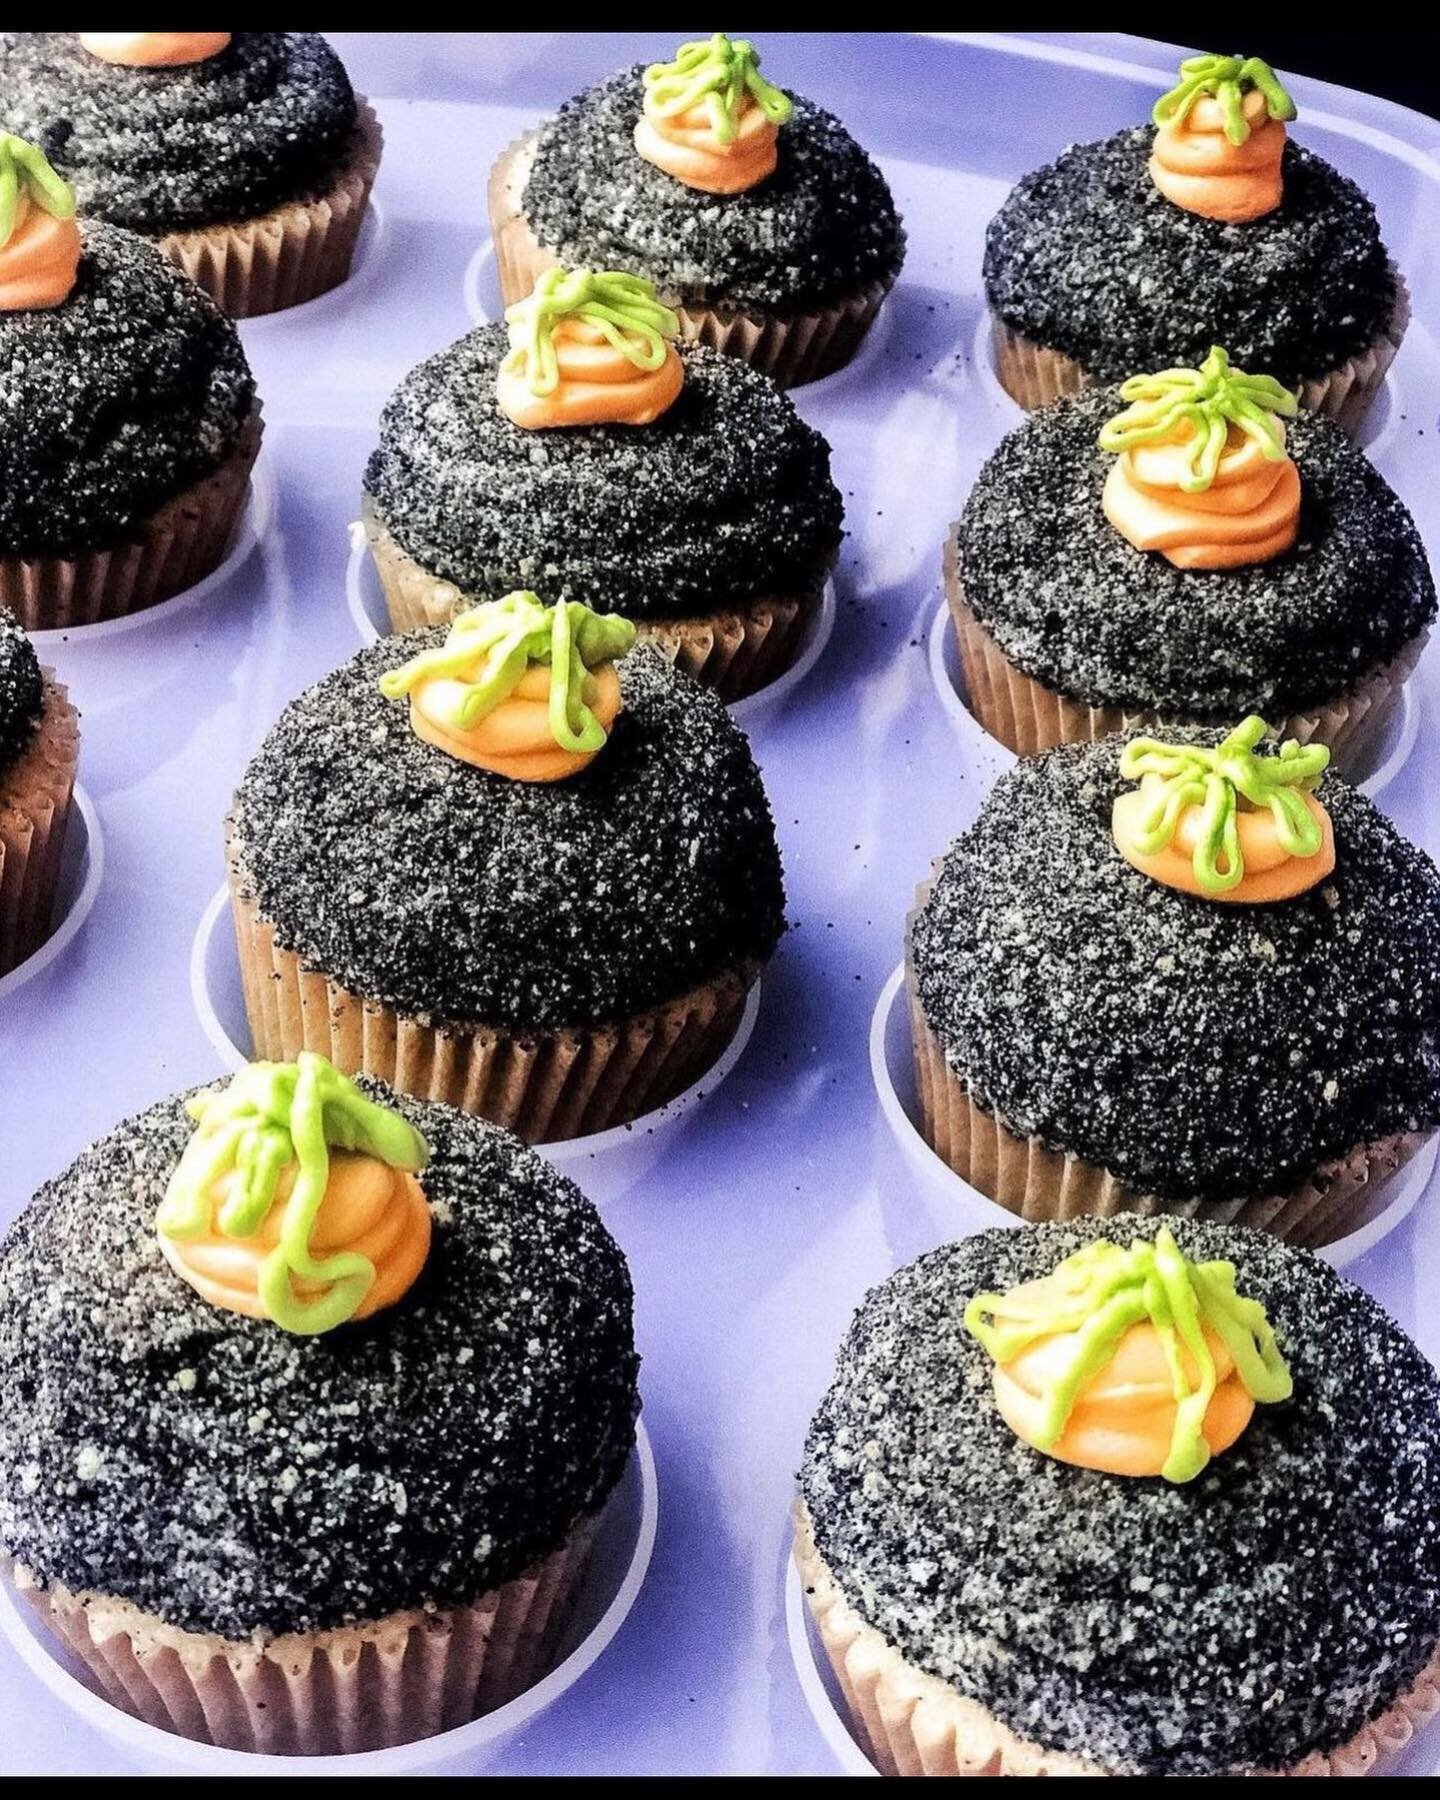 Another cutie Easter recipe ☺️🥕🐰 Carrot Top Chocolate Cupcake Garden🪴

Gluten-free chocolate cupcakes with frosting, cookie crumbles, and frosting carrots! So delicious and adorable. I have a dairy-free option as well🧡 full recipe is on my websit